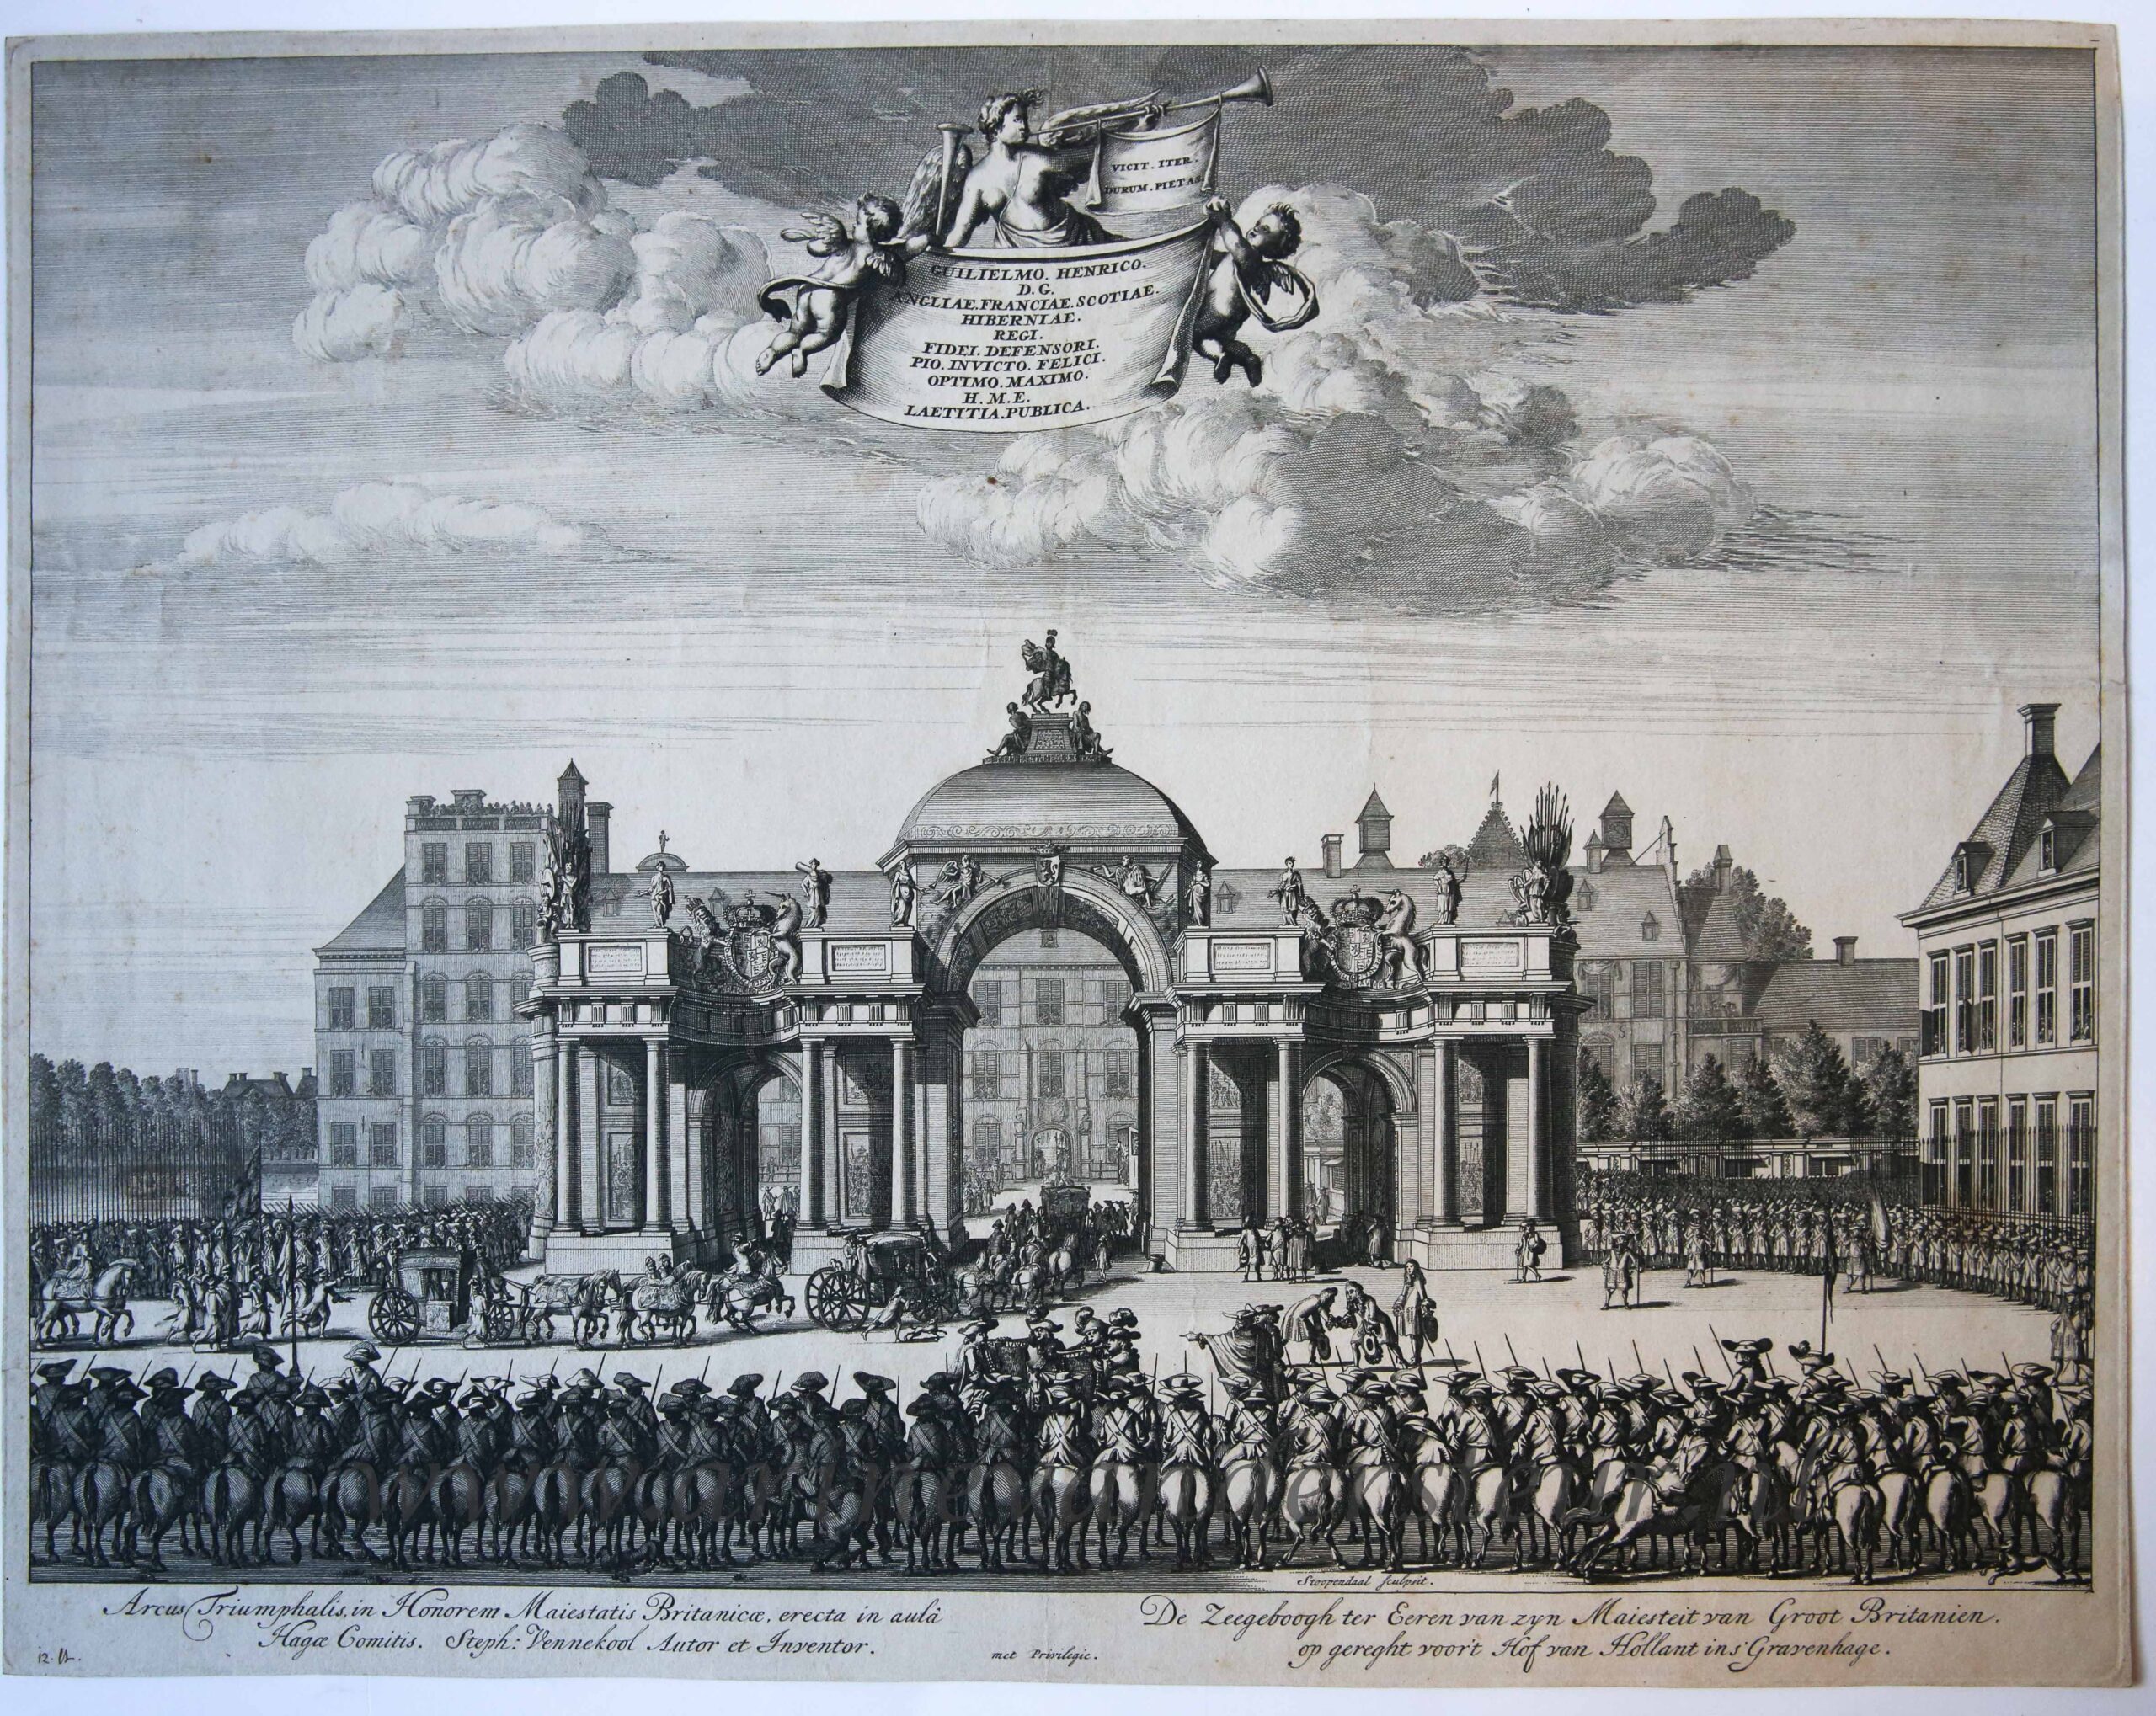 [Antique print, etching] Entrance of William III in The Hague (Binnenkomst Willem III in Den Haag), published 1691.